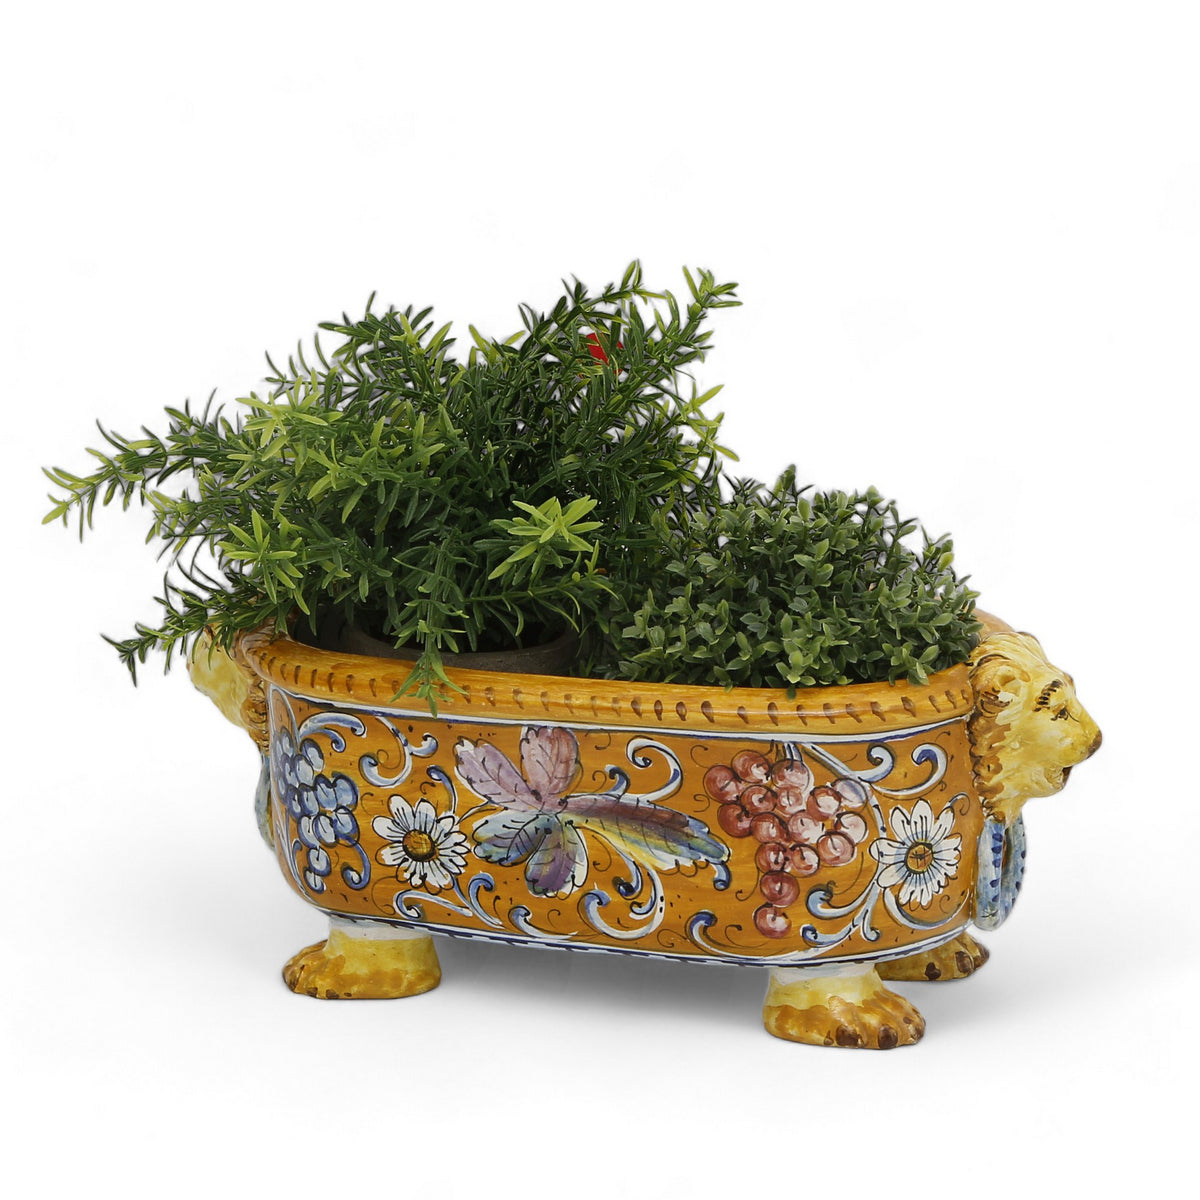 TUSCAN MAJOLICA: Small Tuscan Oval Jardiniere hand decorated with a floral design over a Royal Burgundy. Lion Heads Handles